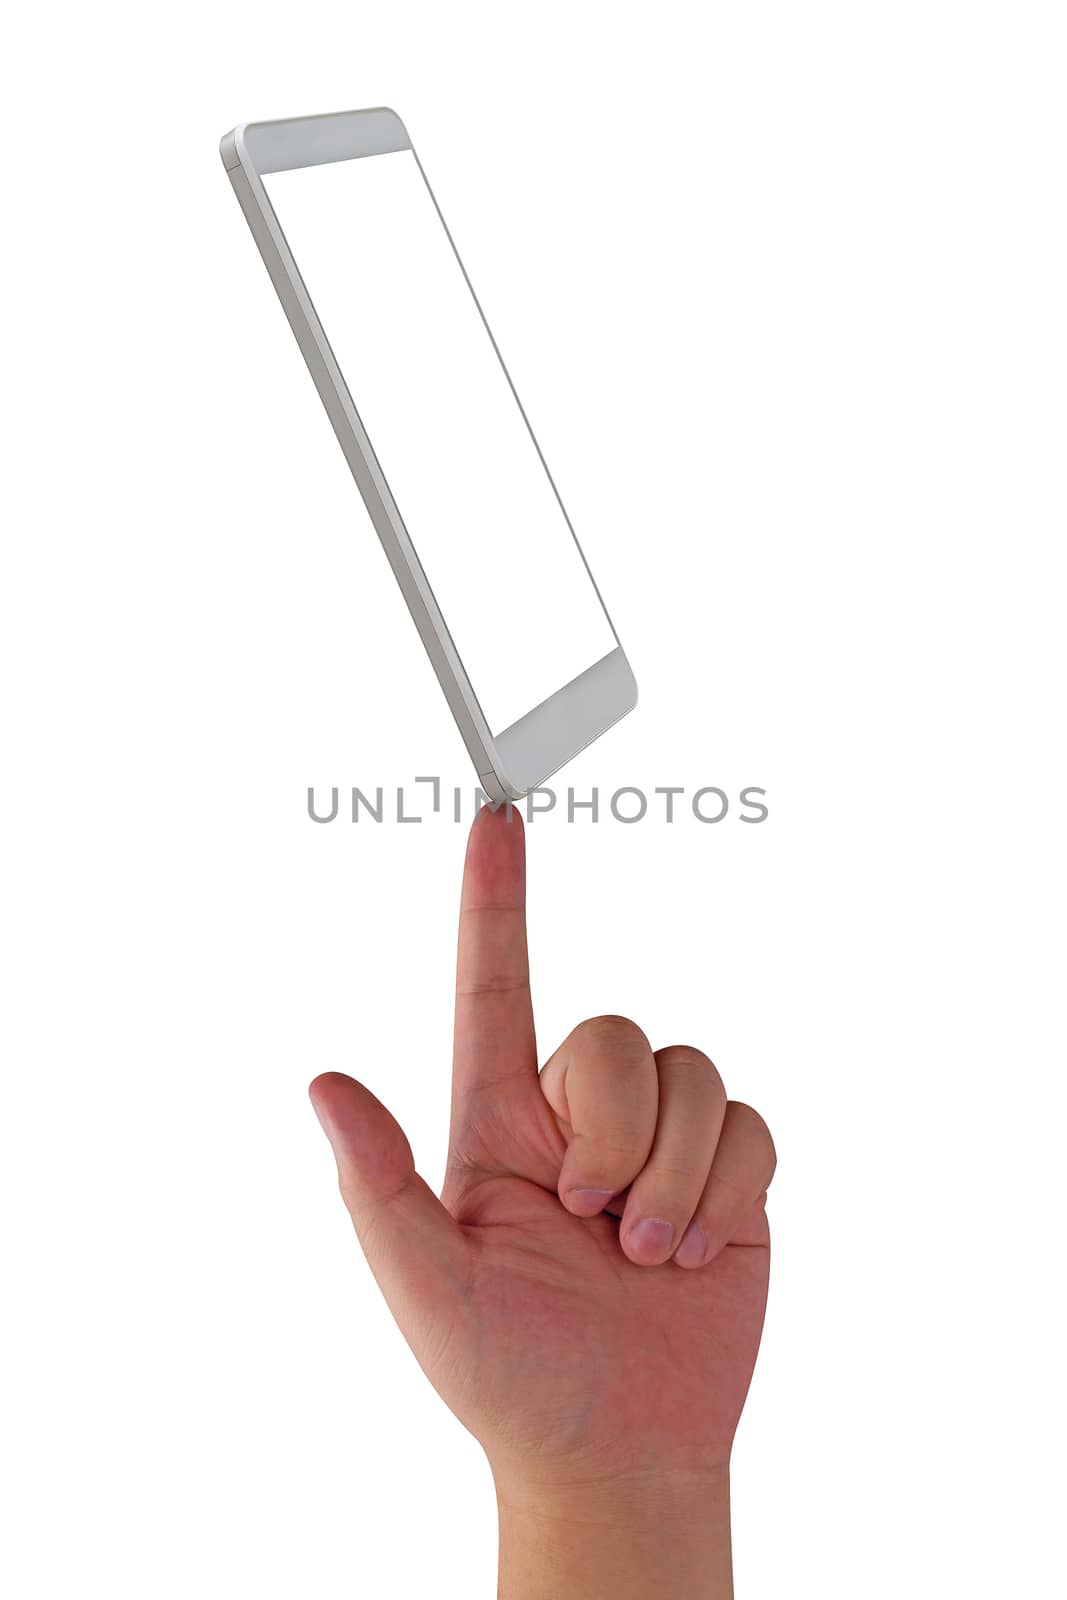 Isolate mobile phone and hand on white background, communication concept